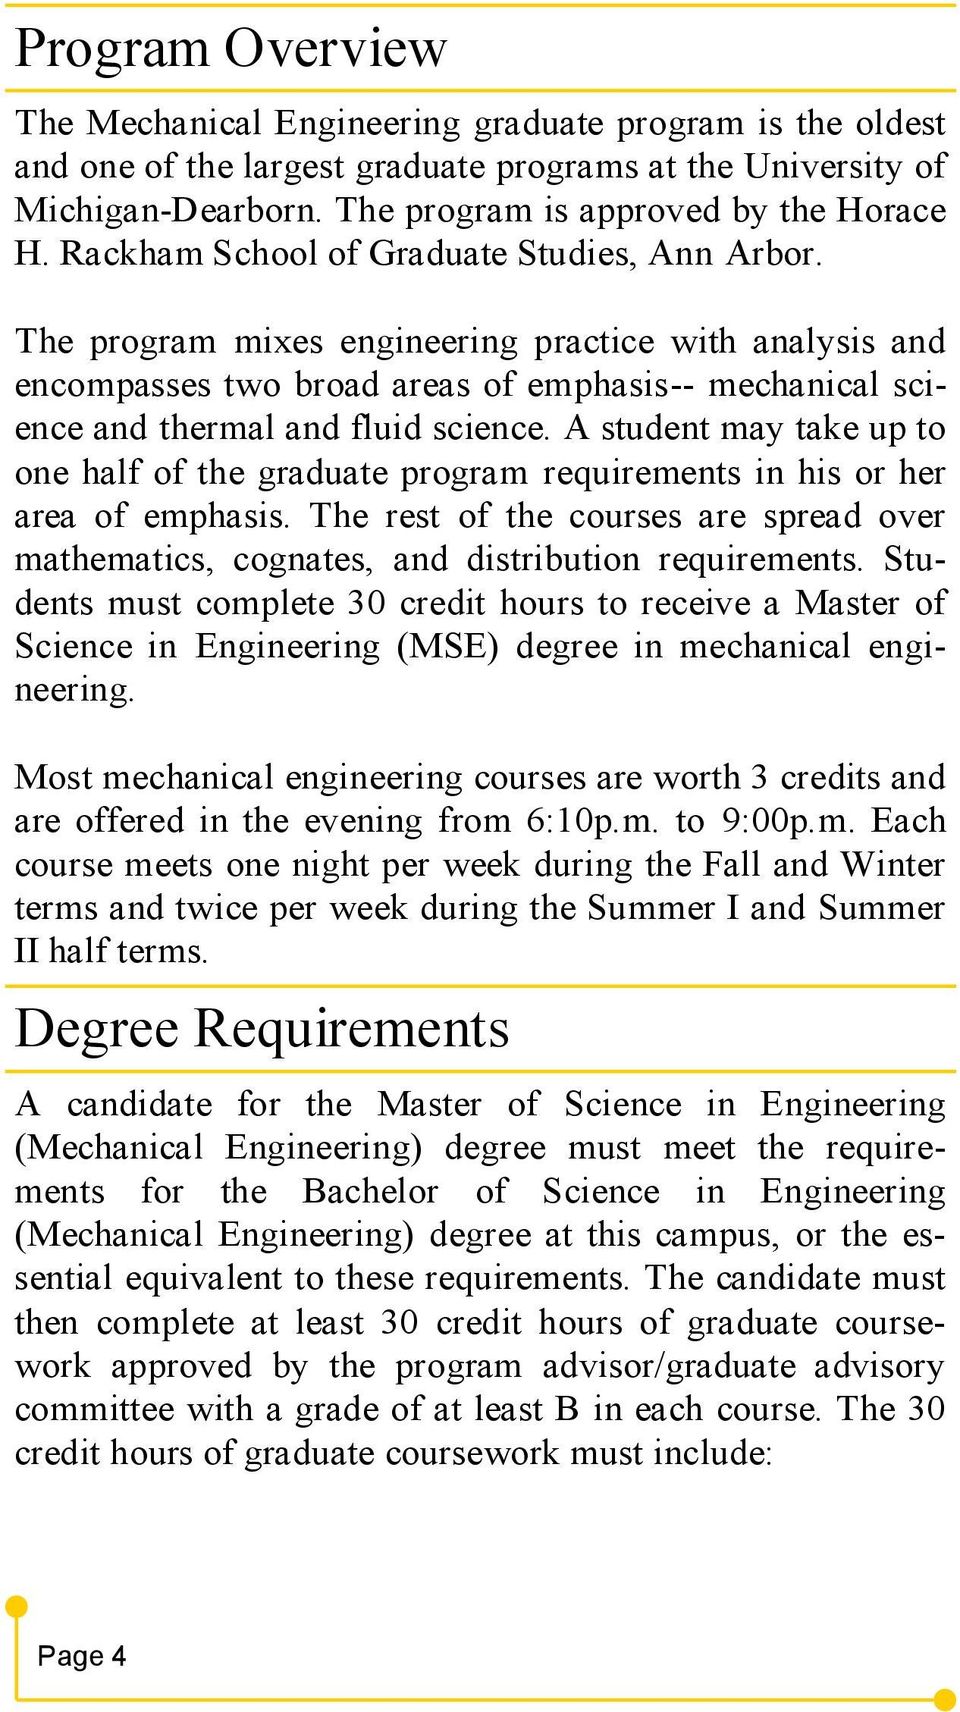 A student may take up to one half of the graduate program requirements in his or her area of emphasis. The rest of the courses are spread over mathematics, cognates, and distribution requirements.